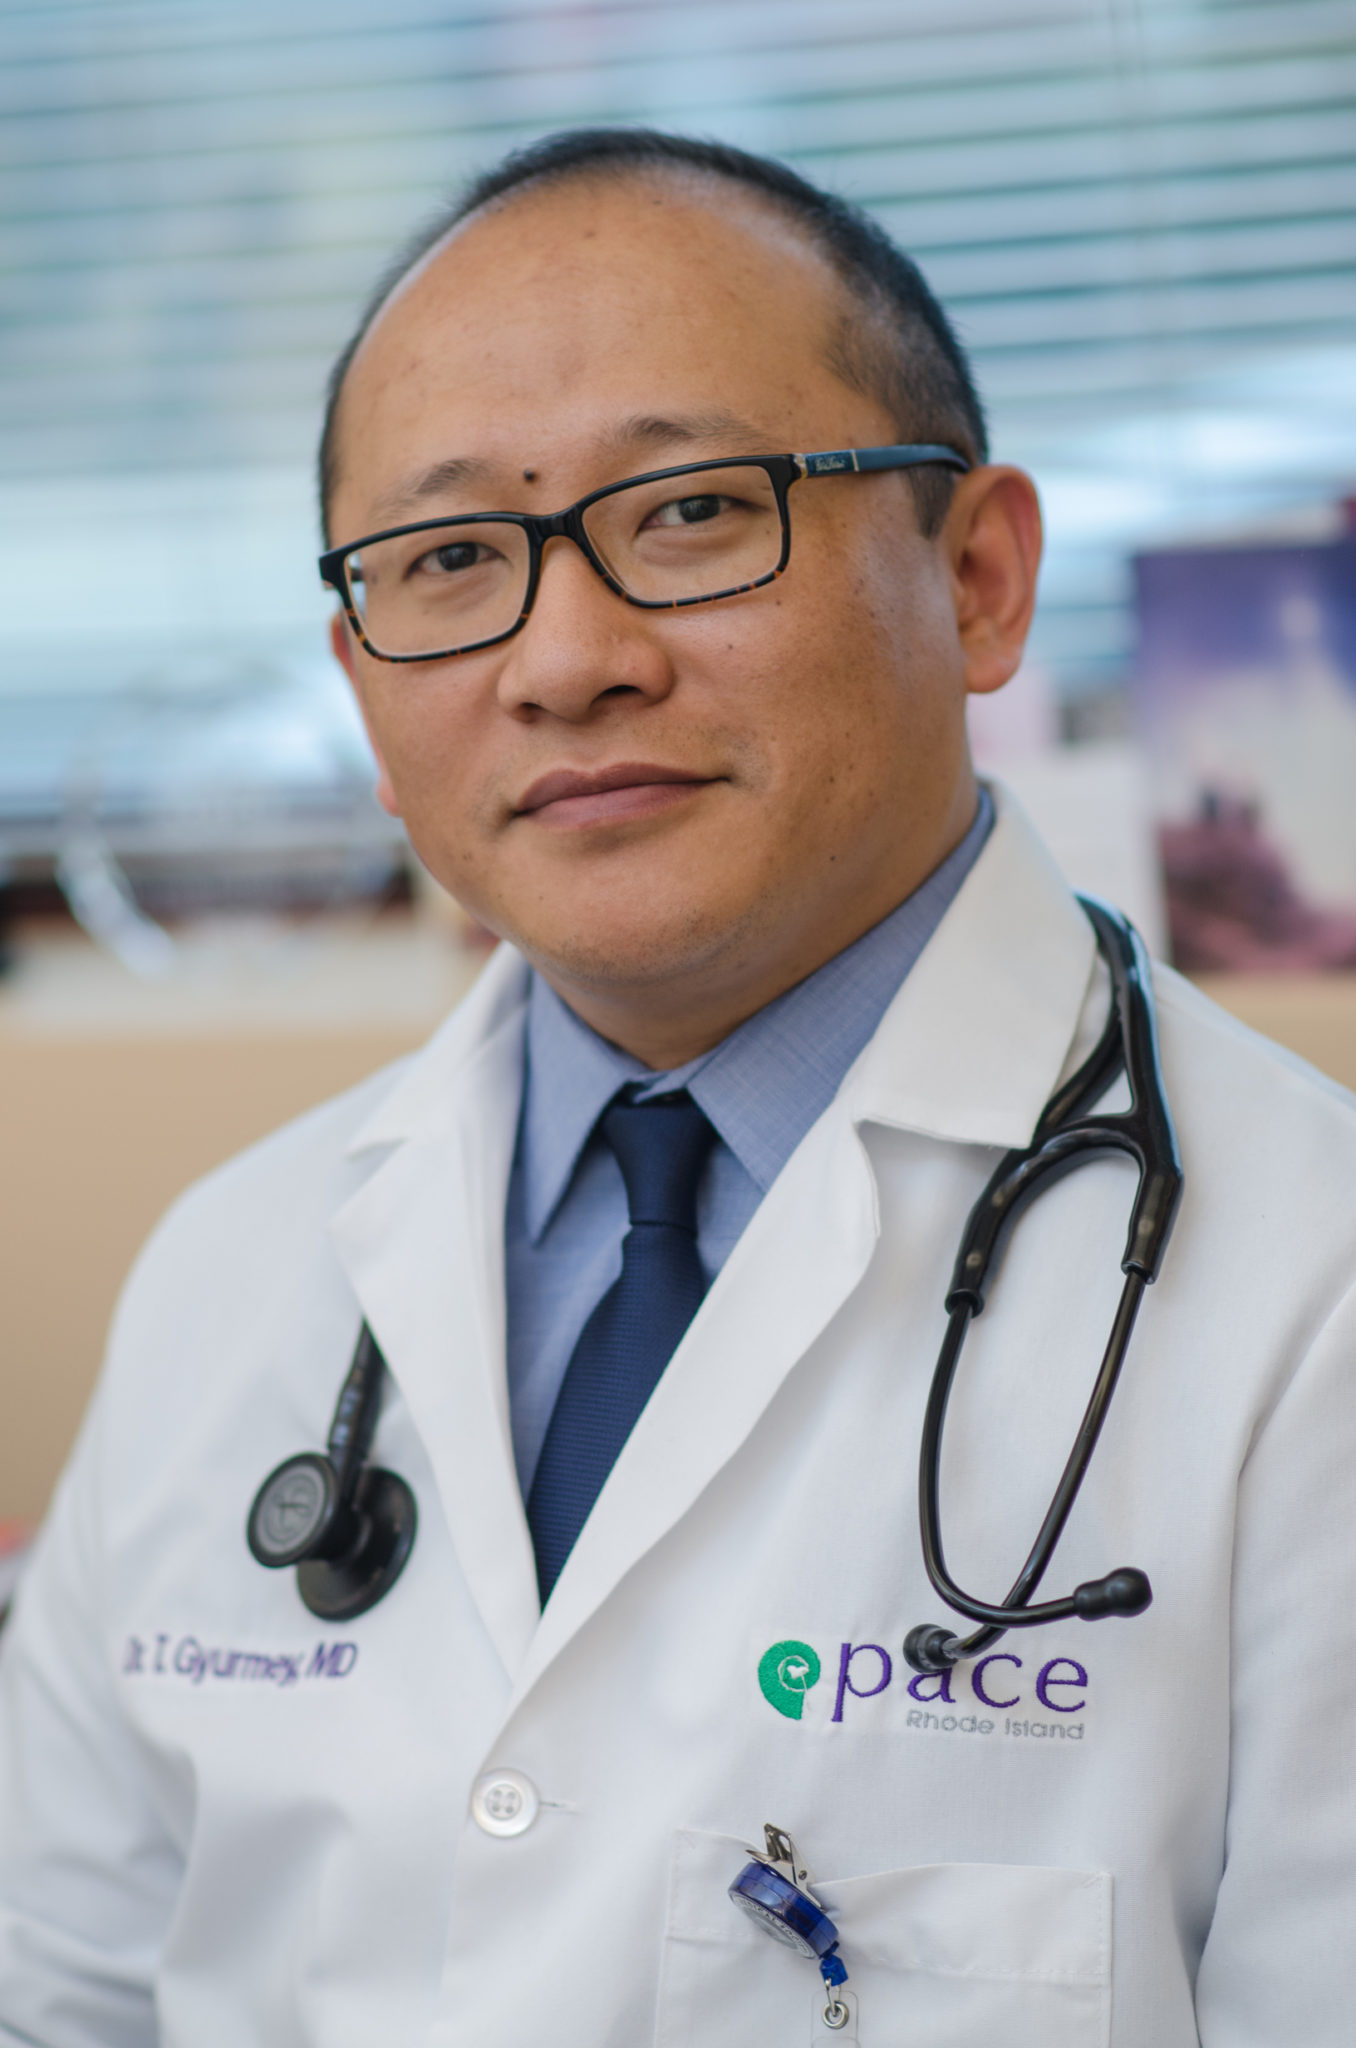 PACE Chief Medical Officer Dr. Tsewang Gyurmey. / COURTESY PACE